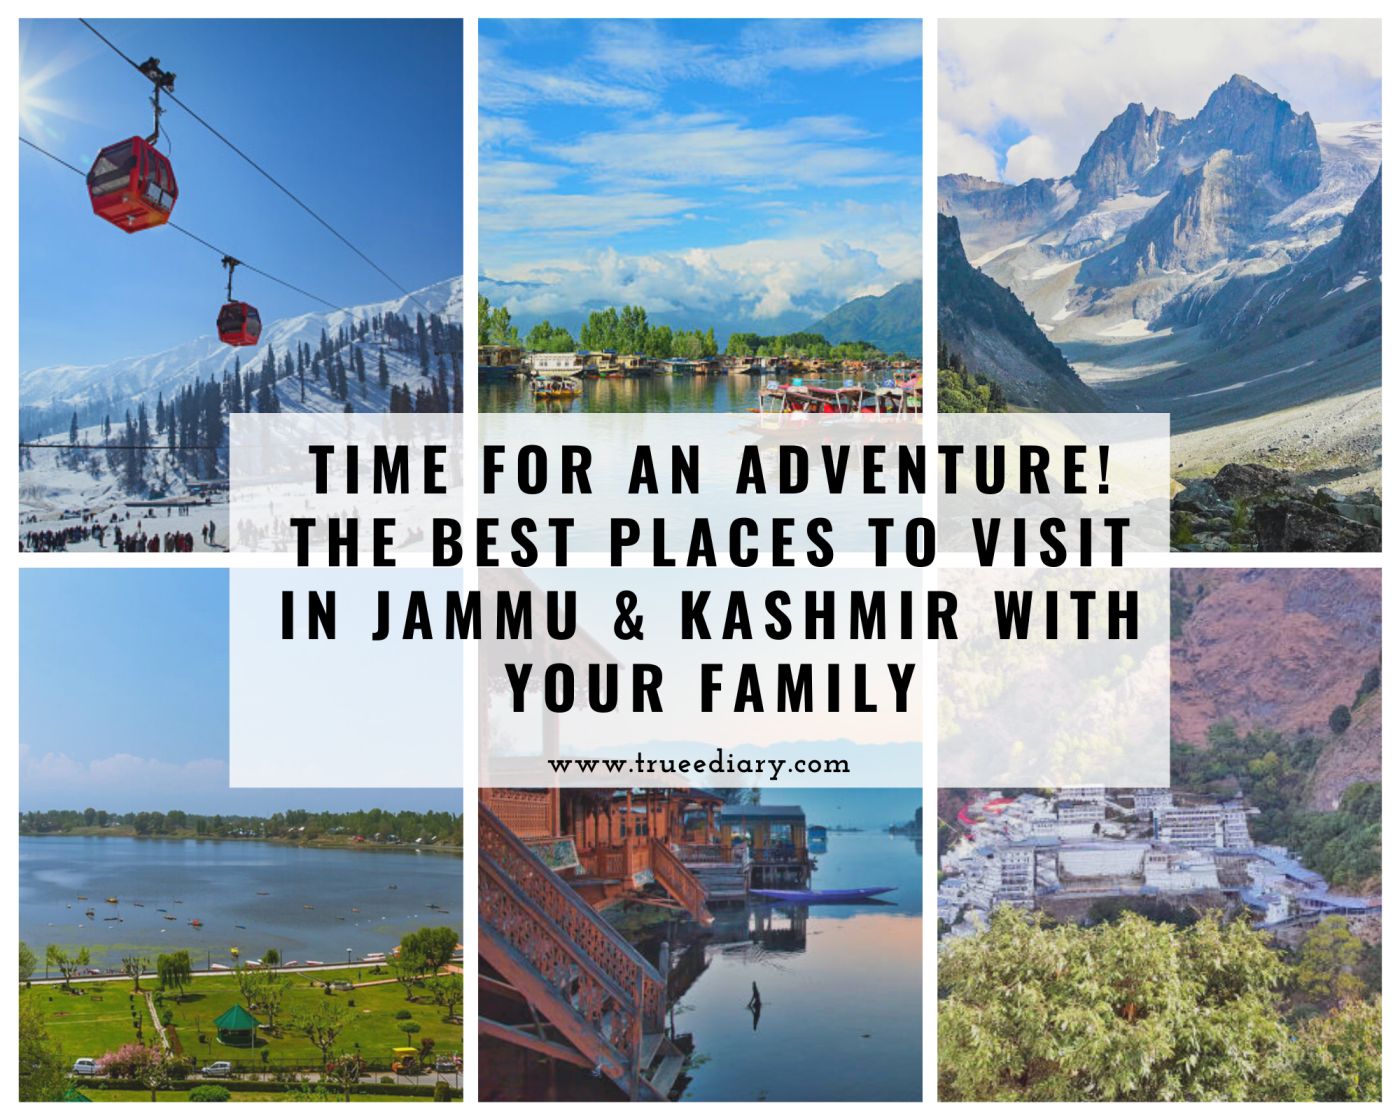 Time for an adventure! The Best Places To Visit In Jammu & Kashmir With Your Family